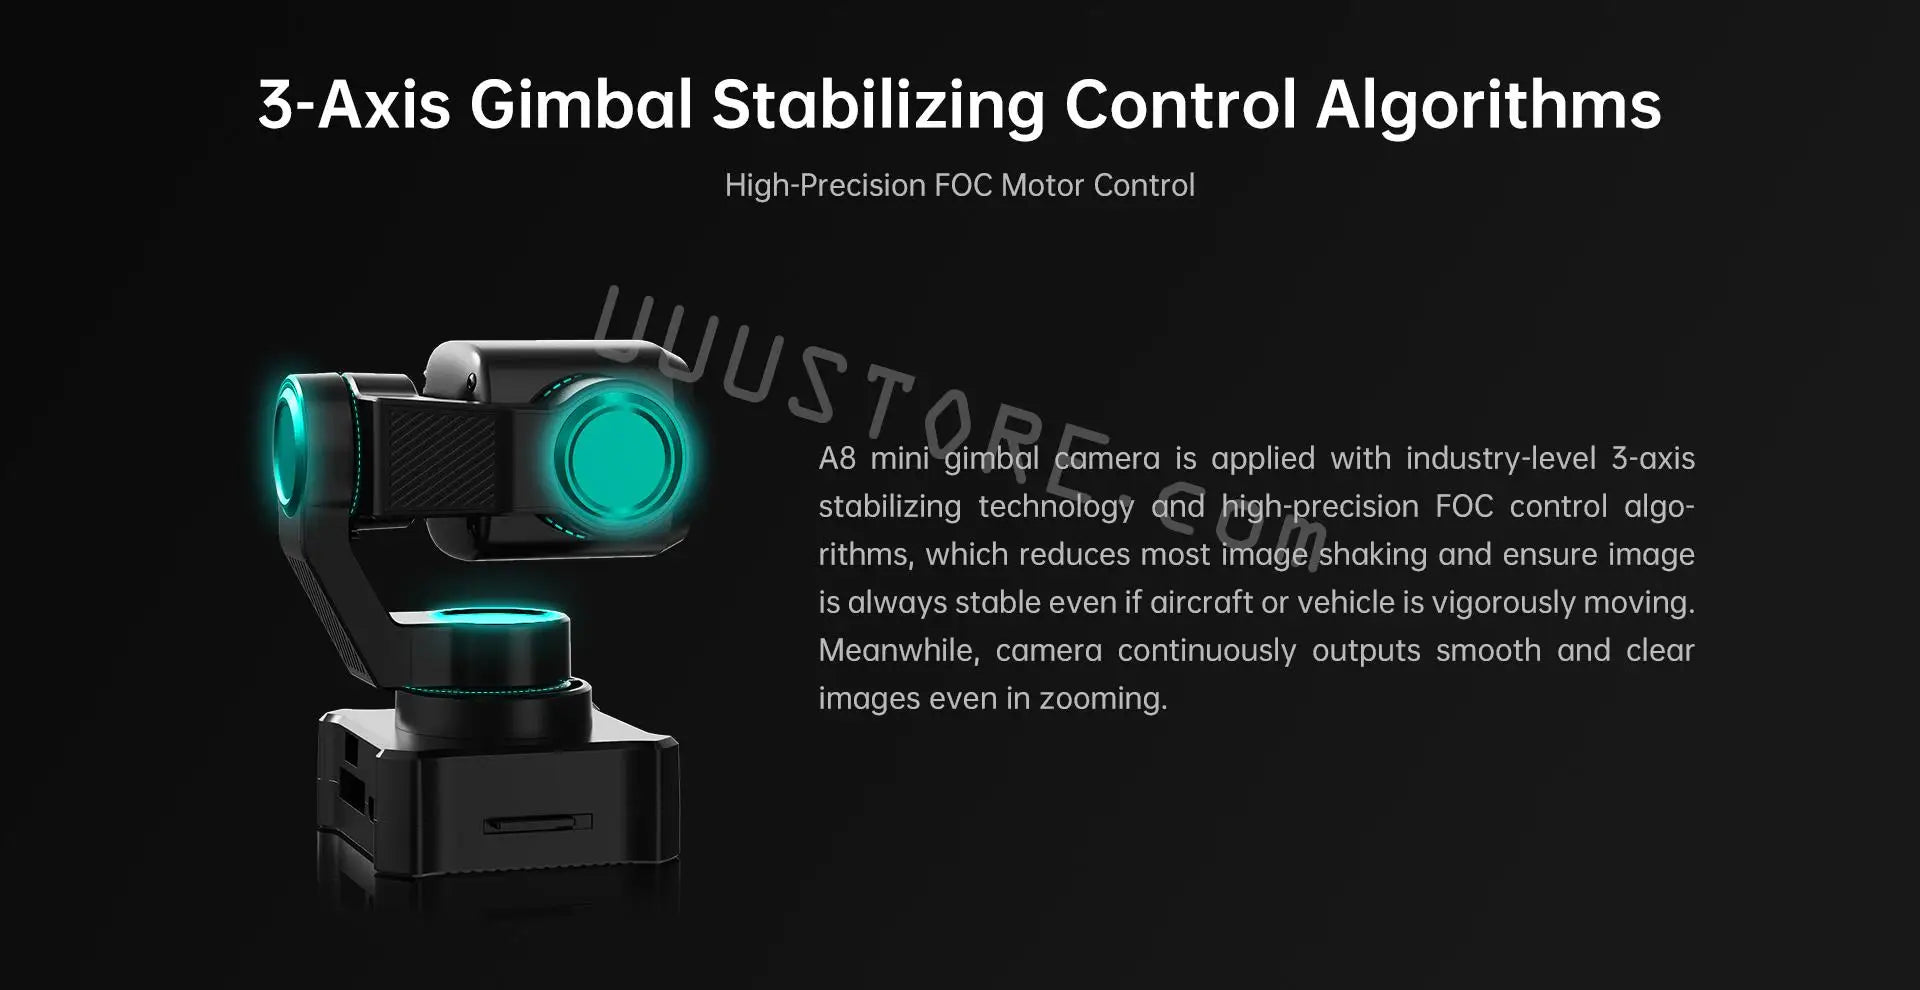 A8 mini camera is applied with industry-level 3-axis stabilizing technology and high-